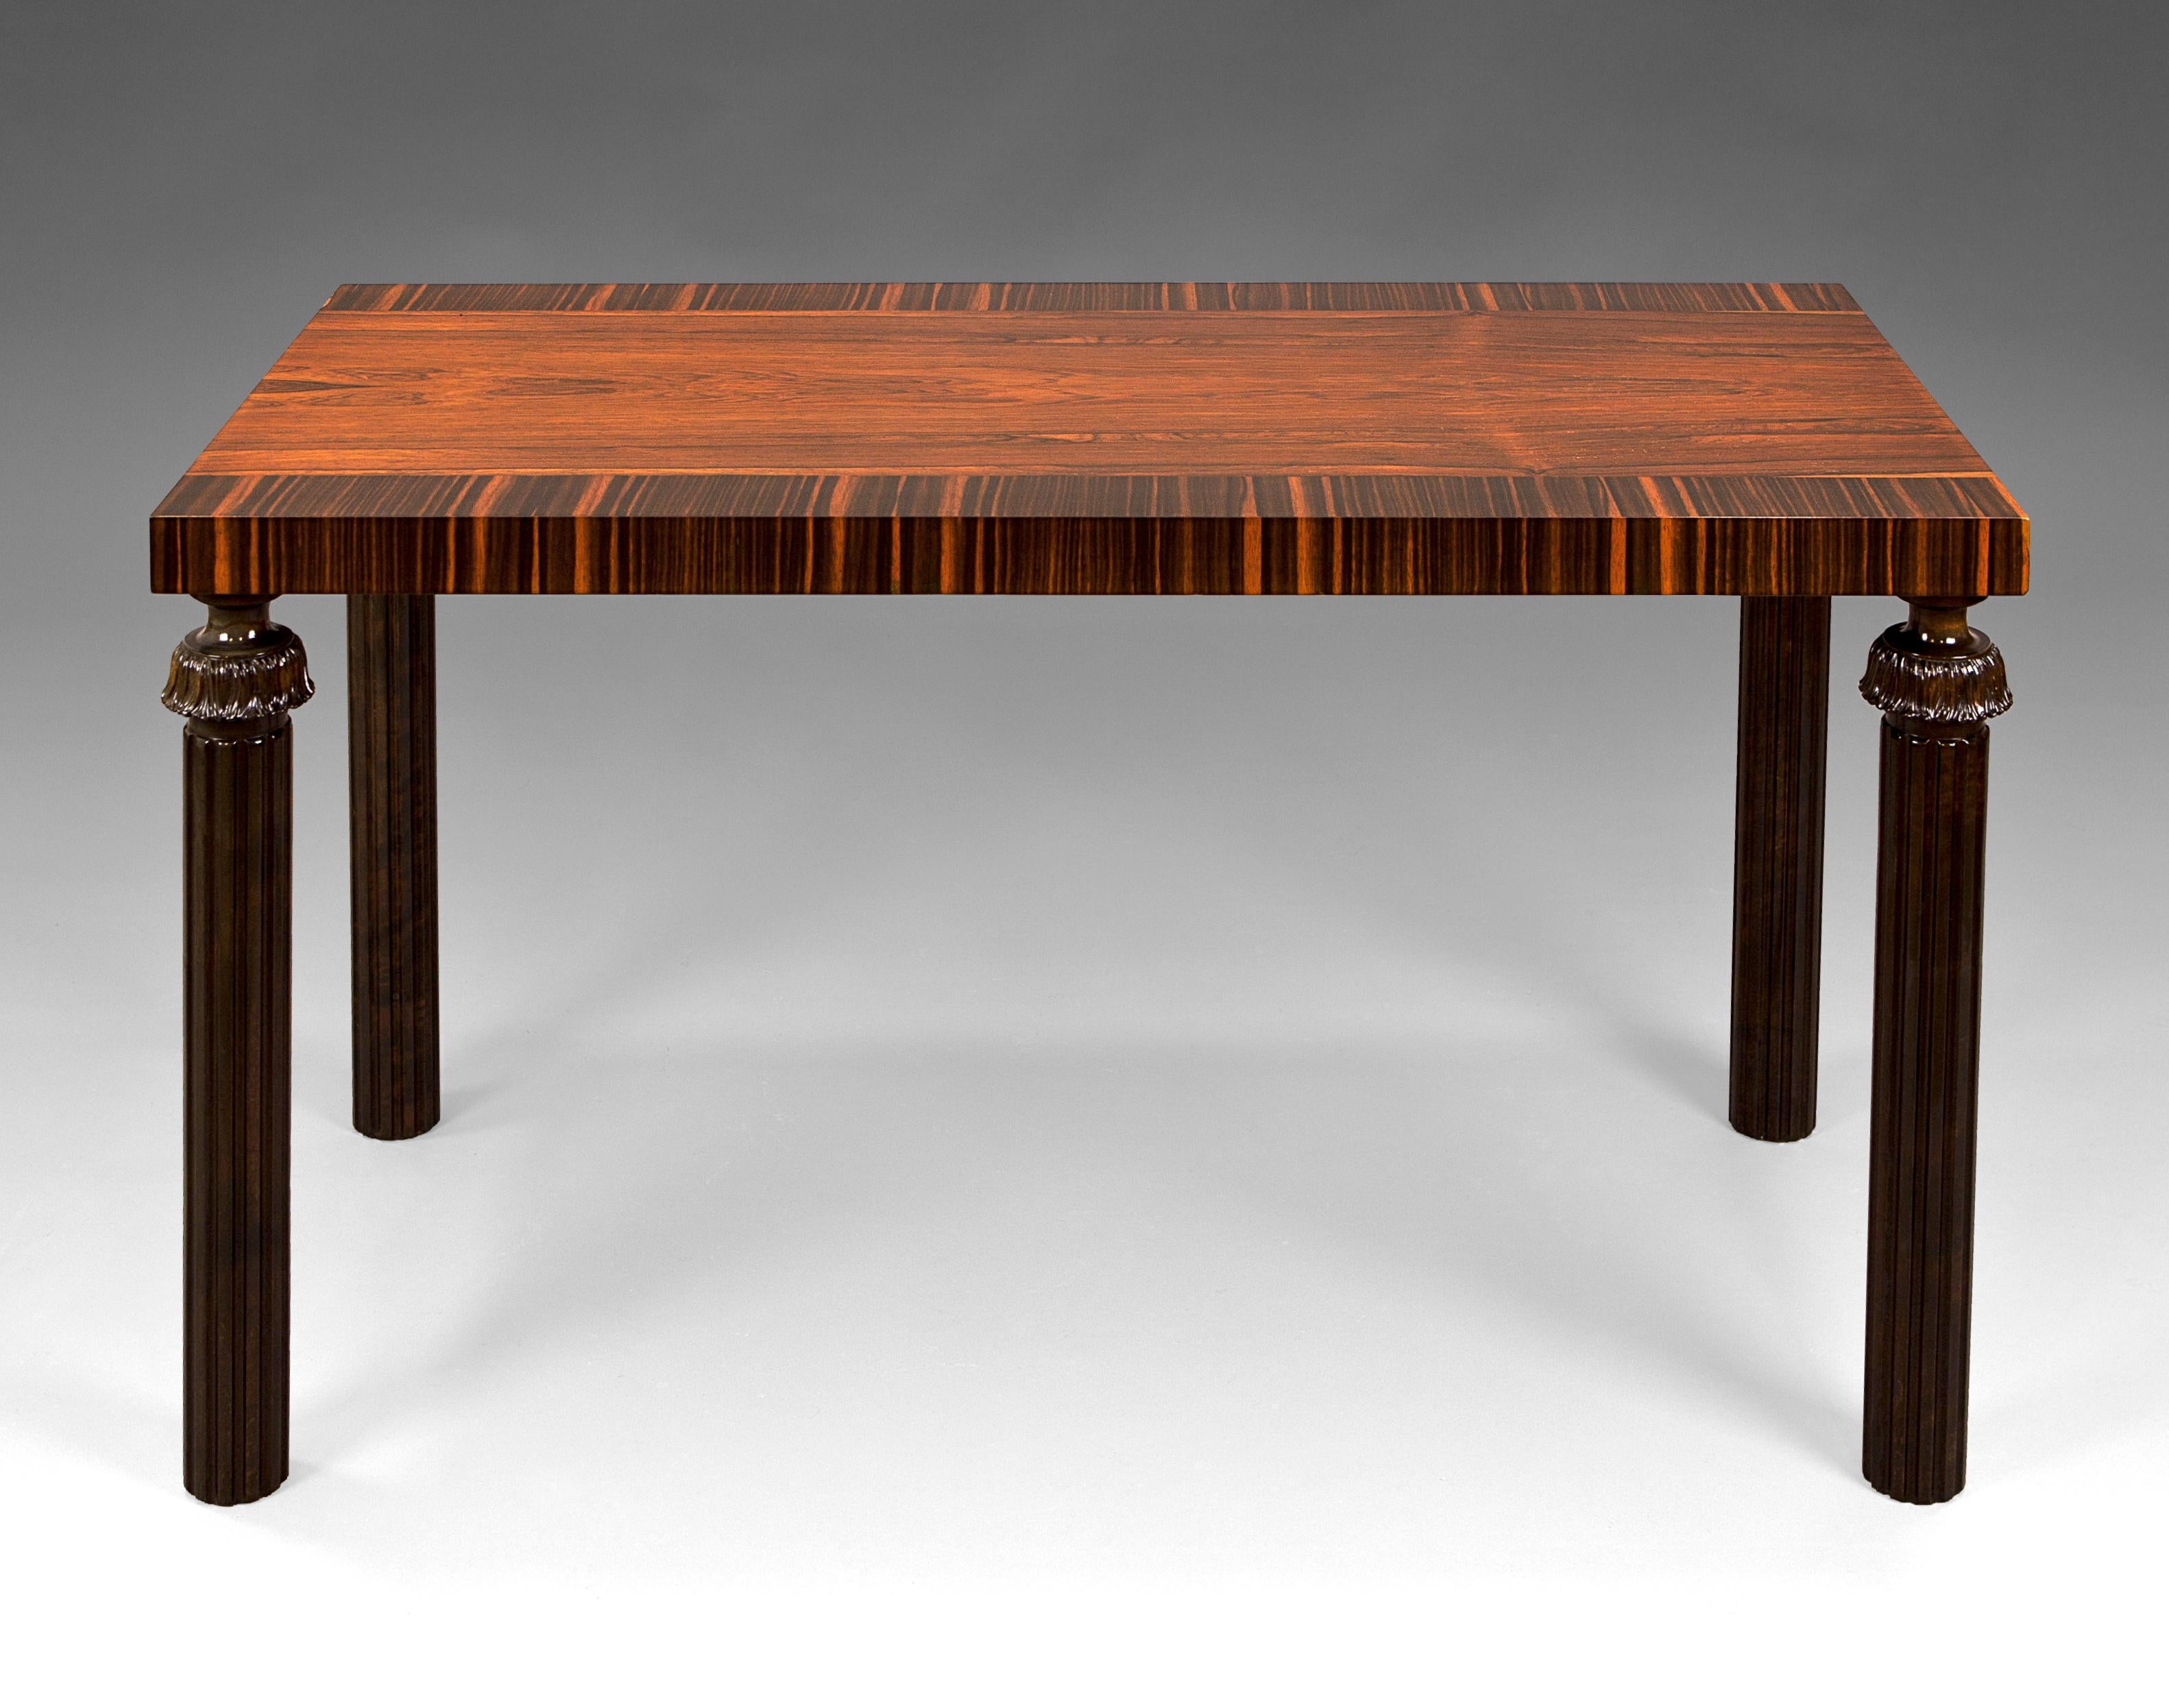 Console table or side table art deco in stained birch wood, zebrano and rosewood produced by Reiners Möbelfabrik in Mjölby. Sweden 1930’s.

It belongs to the ''Swedish grace'' period which embraces elegance and simplicity, although the designs are